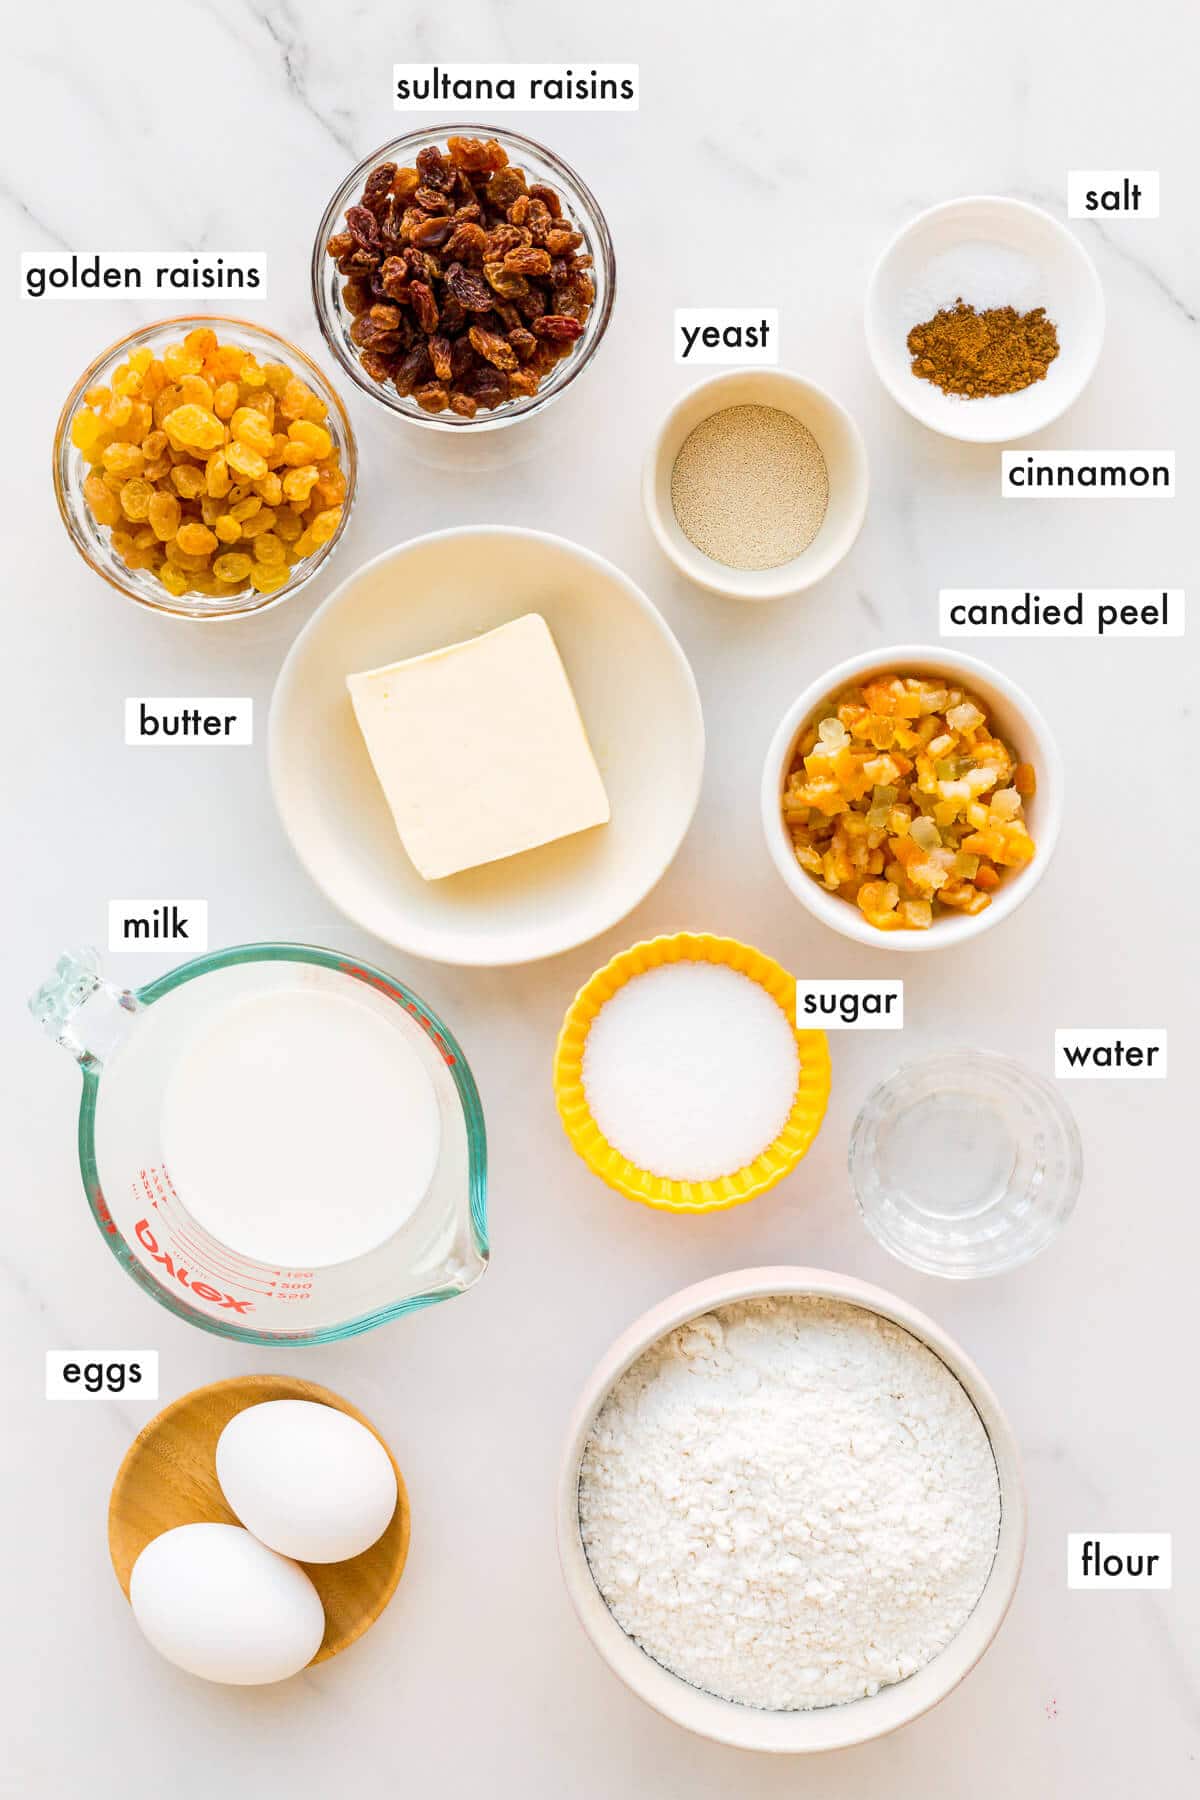 Ingredients to make fruit bread with instant yeast measured out.